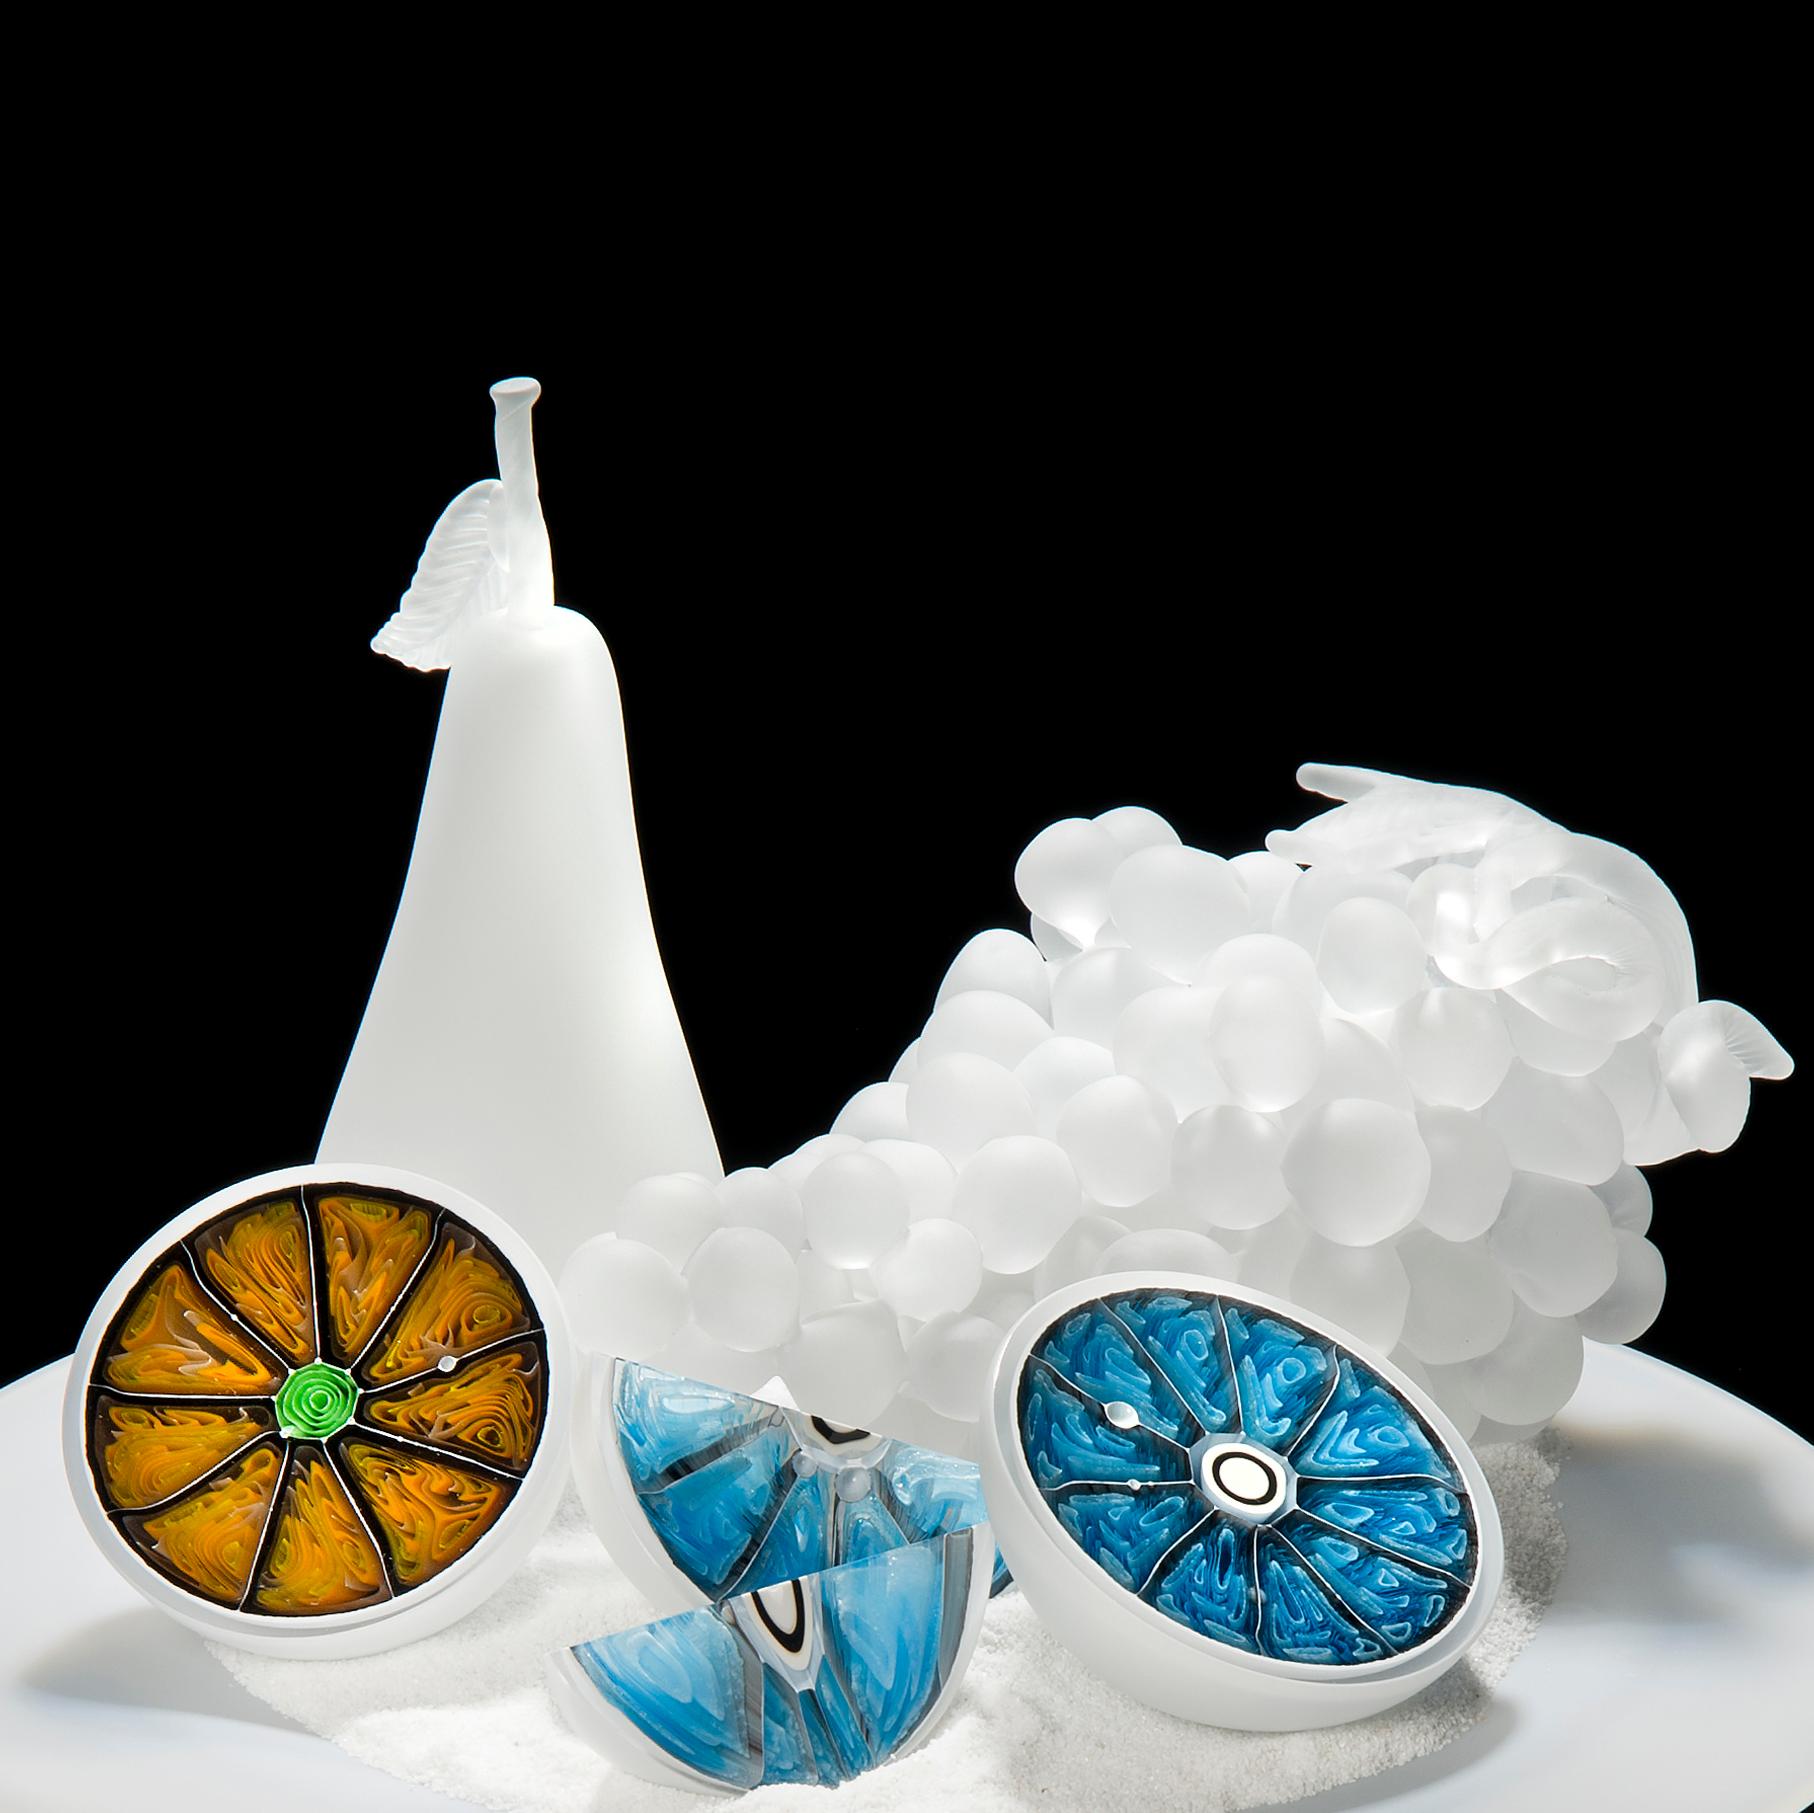 Contemporary Perfect Bounty, a Unique Glass Still Life Installation Art Work by Elliot Walker